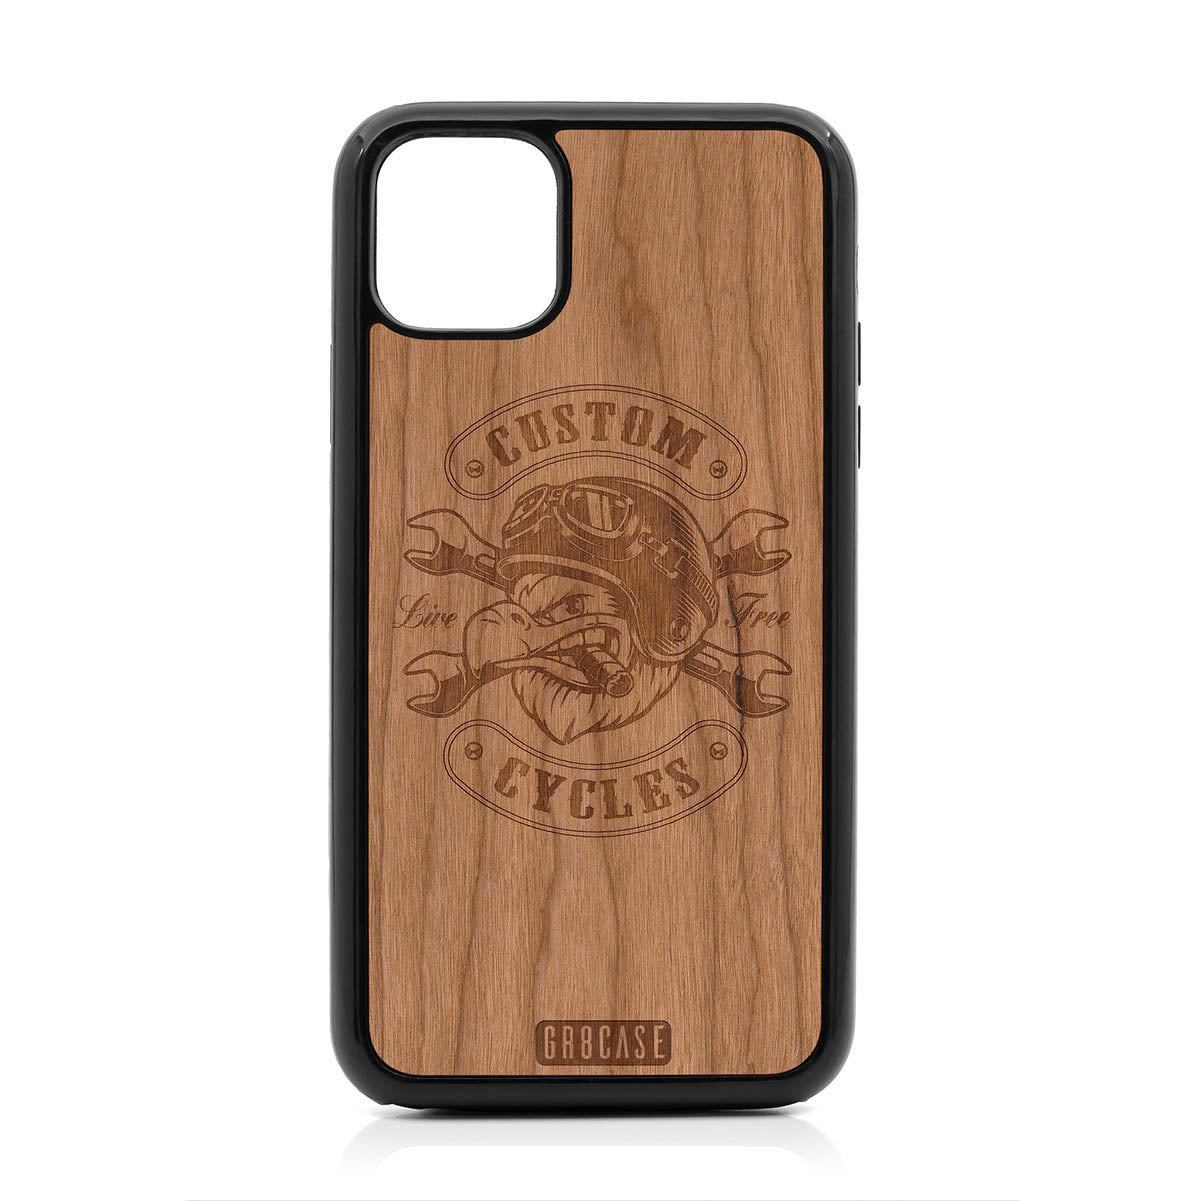 Custom Cycles Live Free (Biker Eagle) Design Wood Case For iPhone 11 Pro Max by GR8CASE